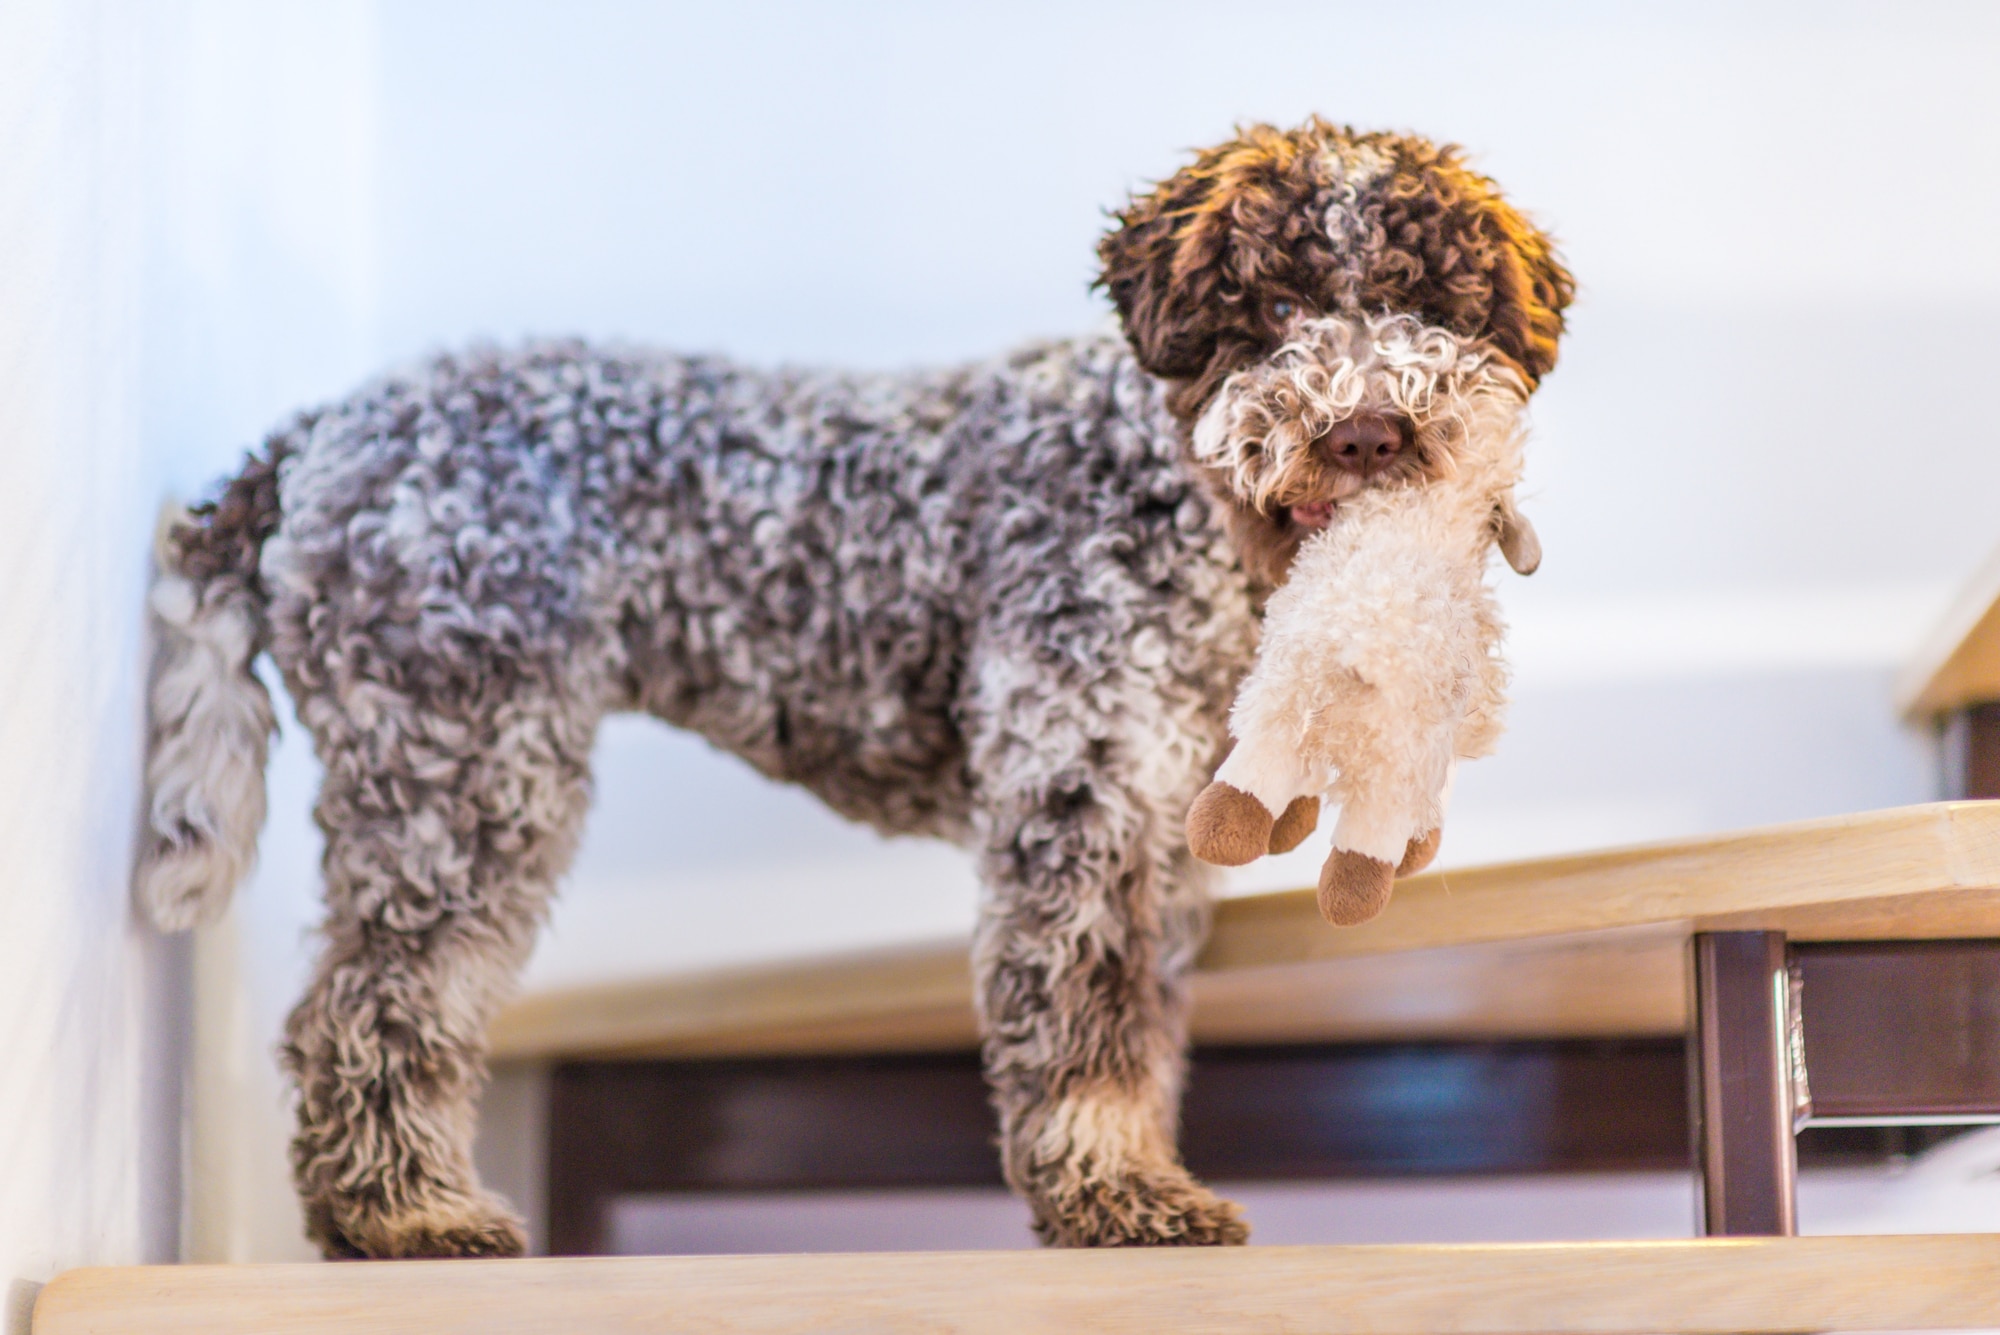 Lagotto Romagnolo with toy